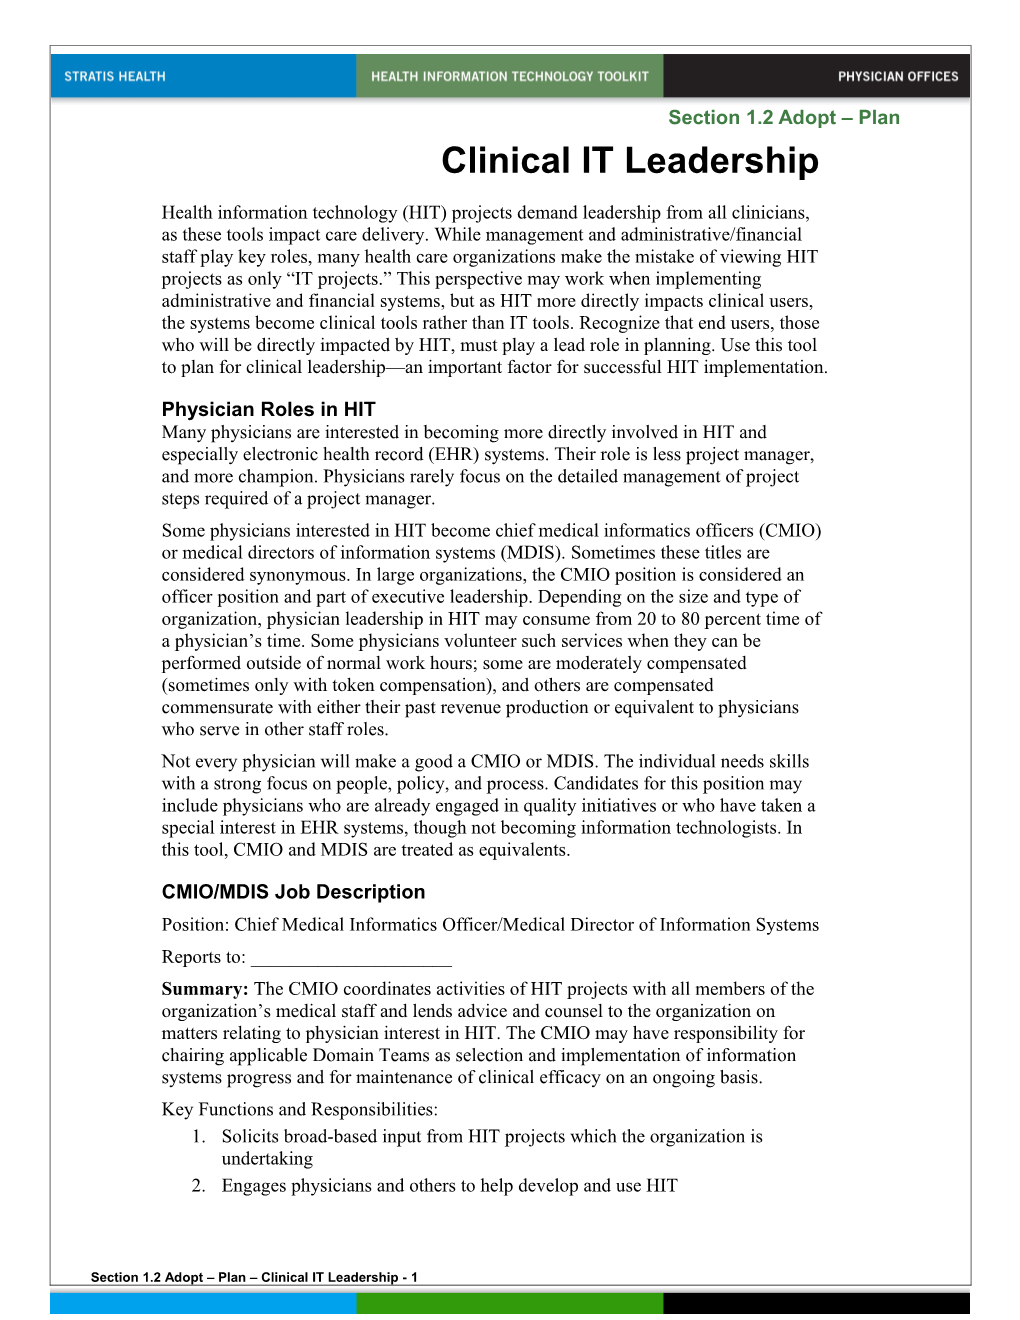 Clinical IT Leadership